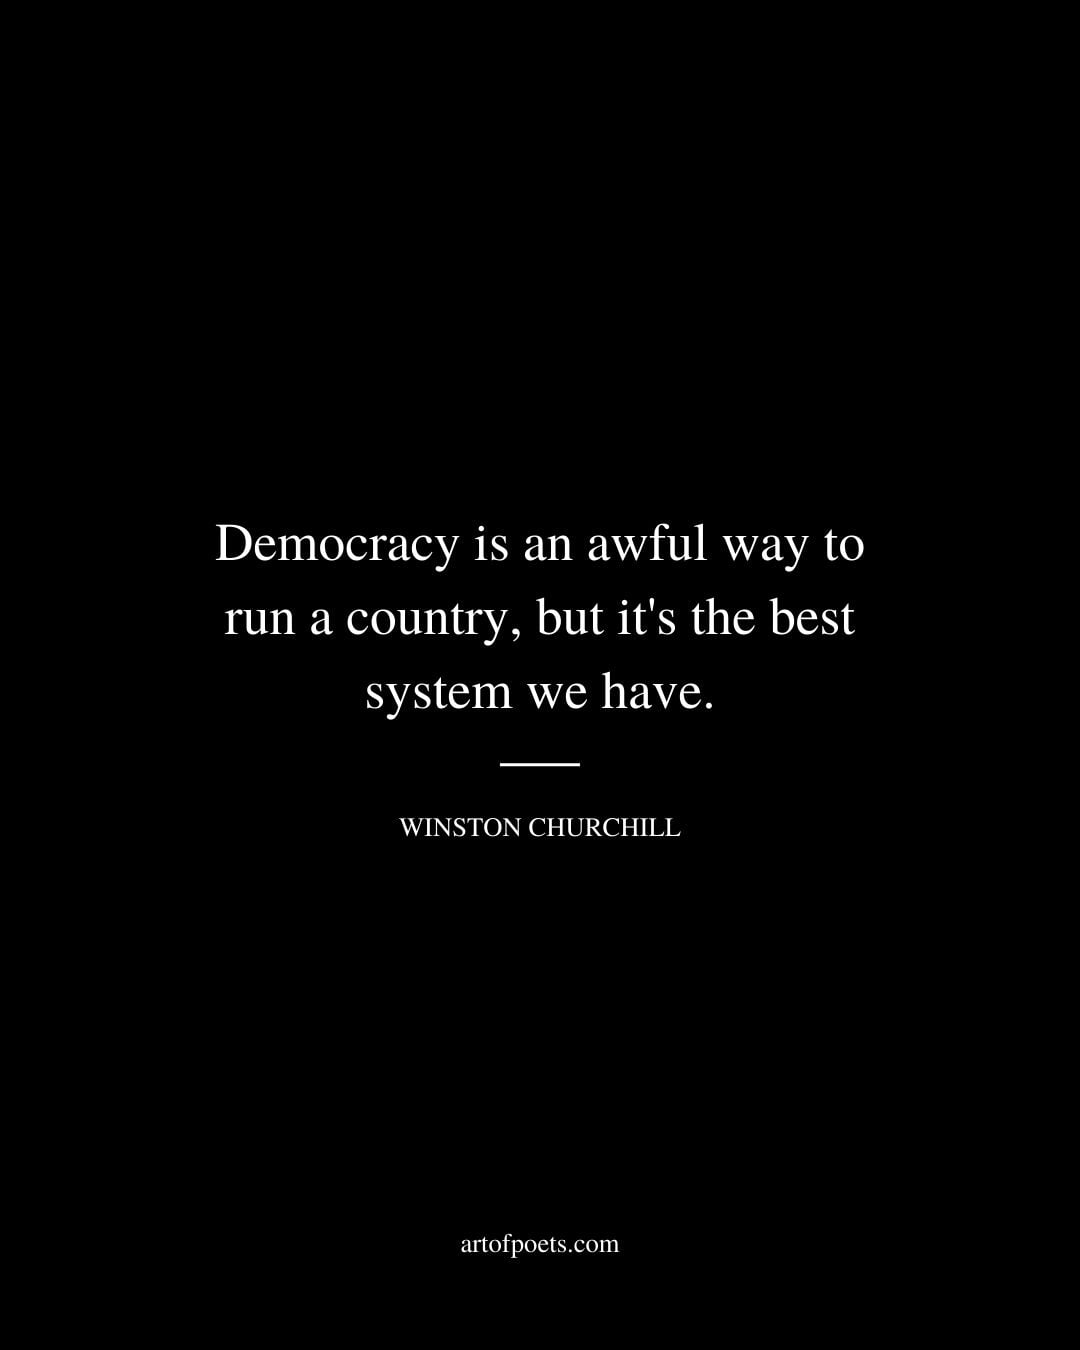 Democracy is an awful way to run a country but its the best system we have